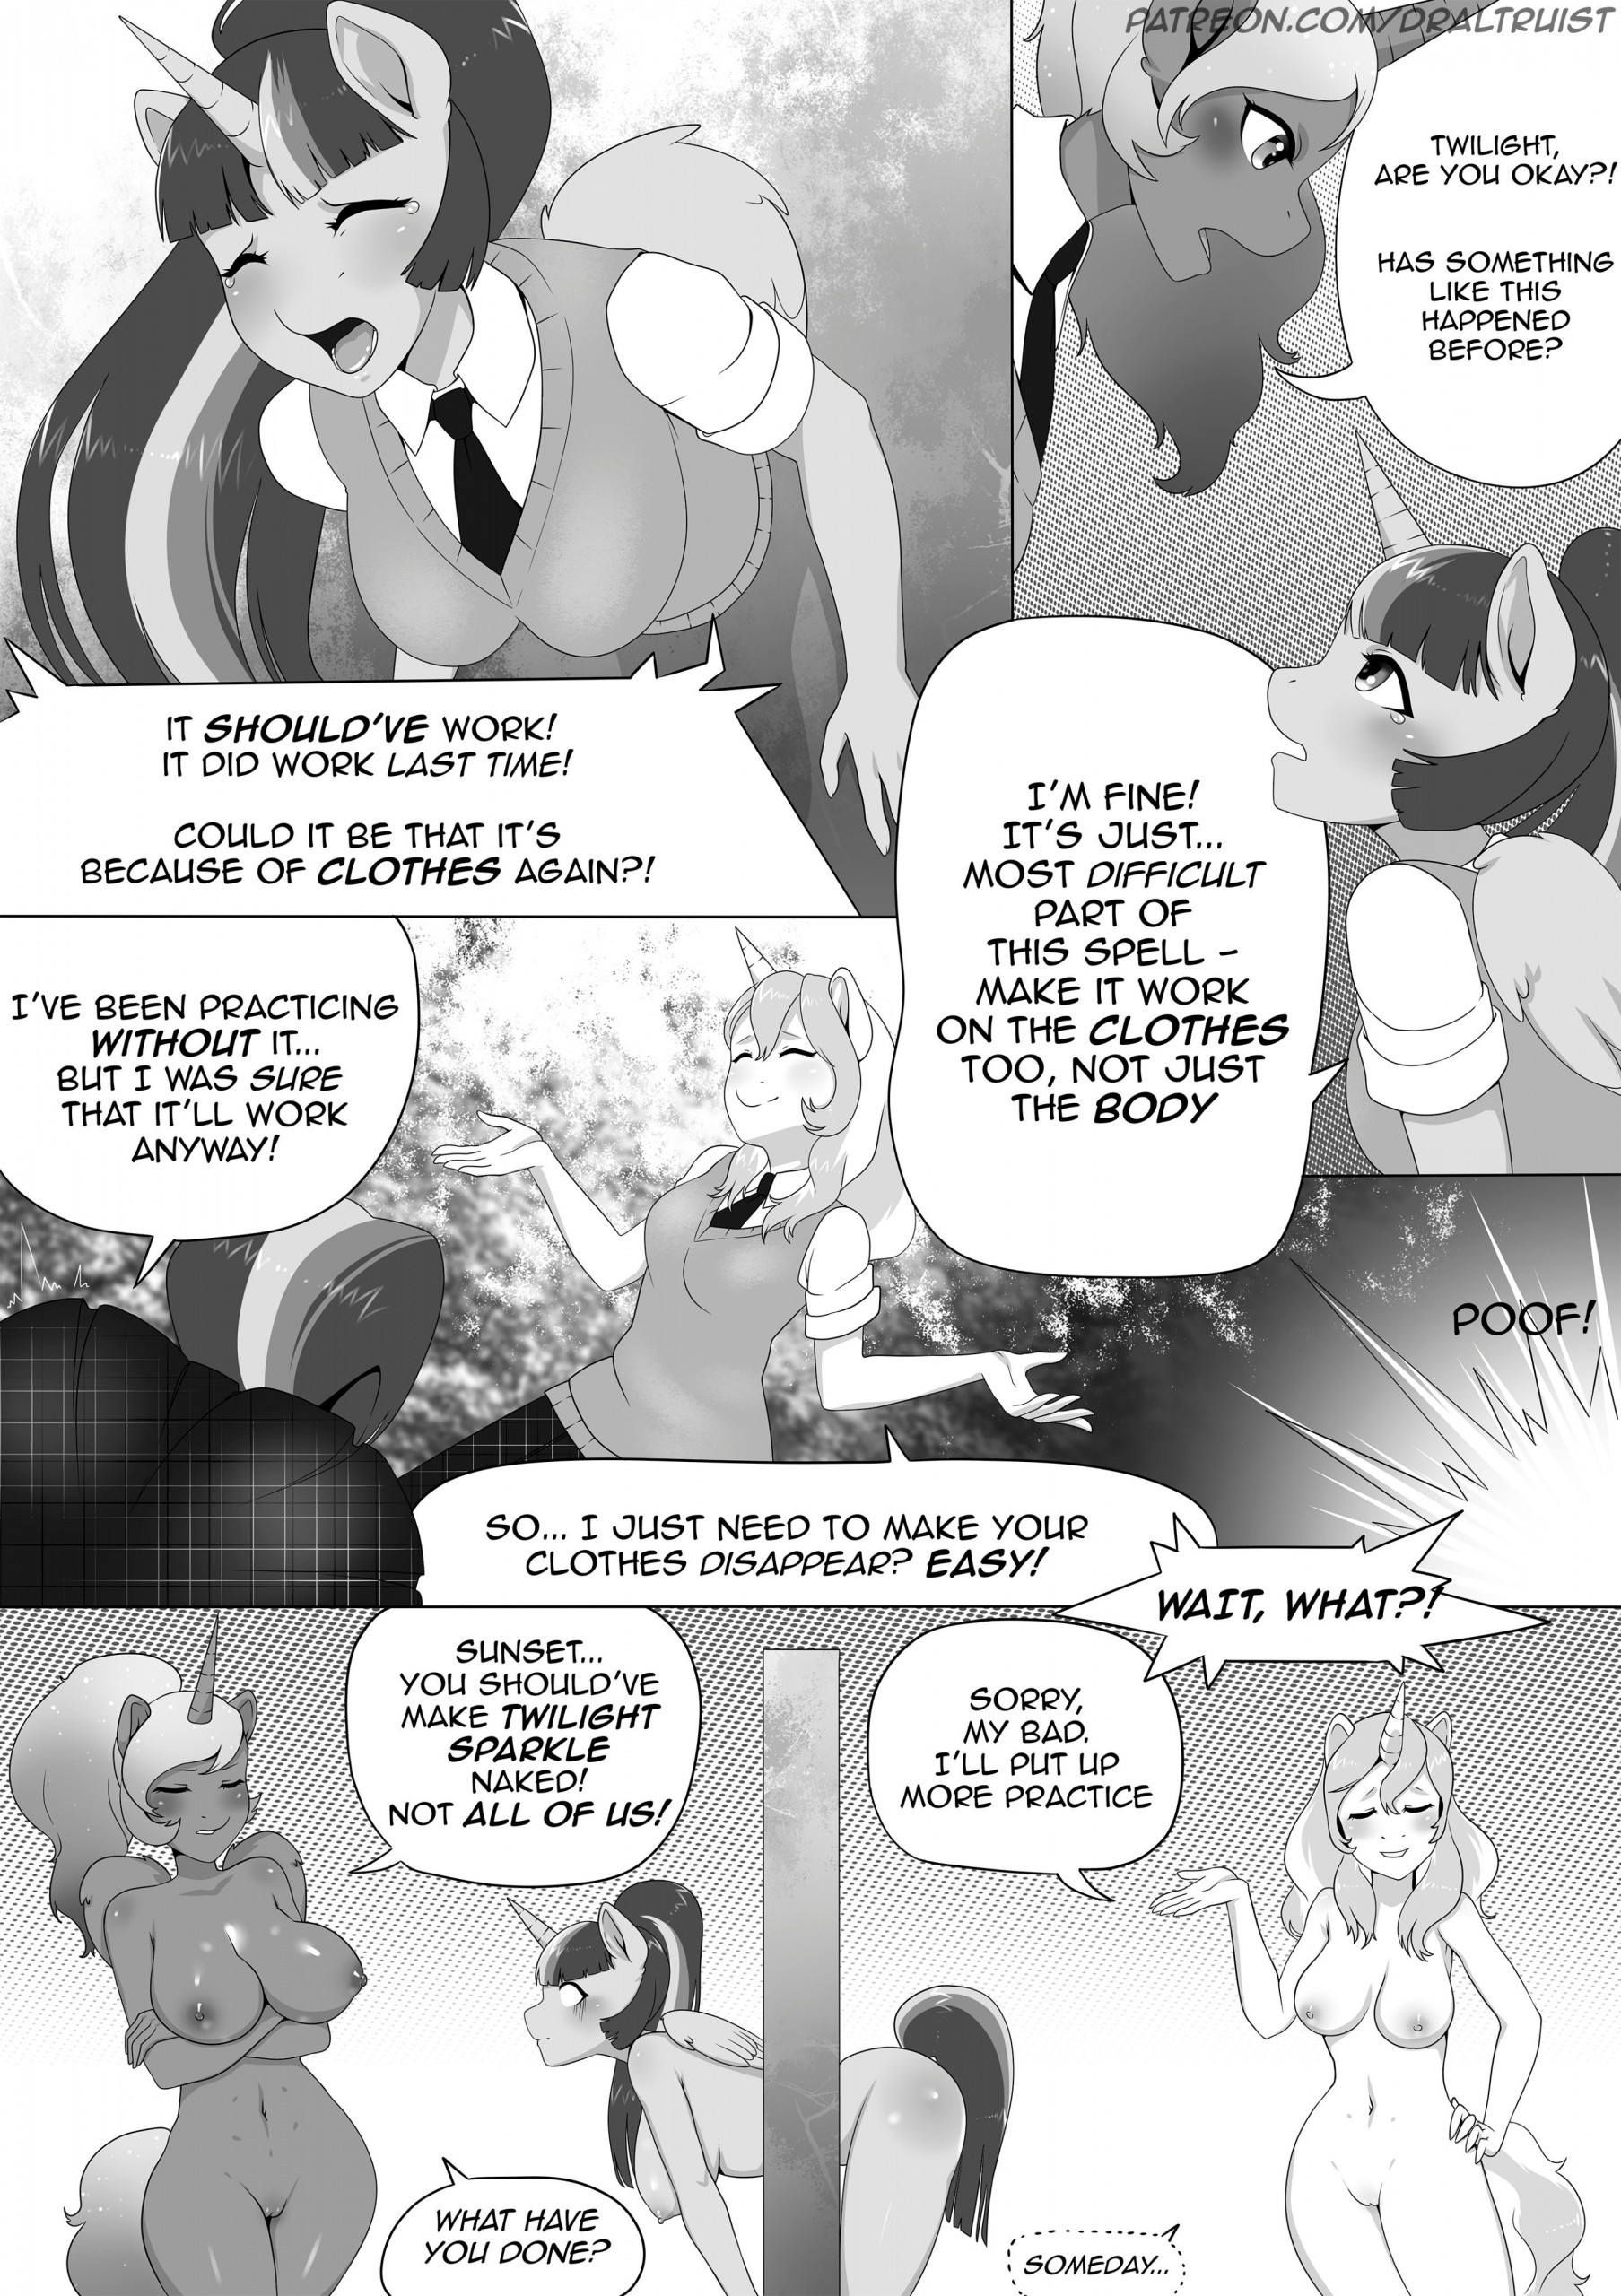 Twilight's New Spell porn comic picture 3